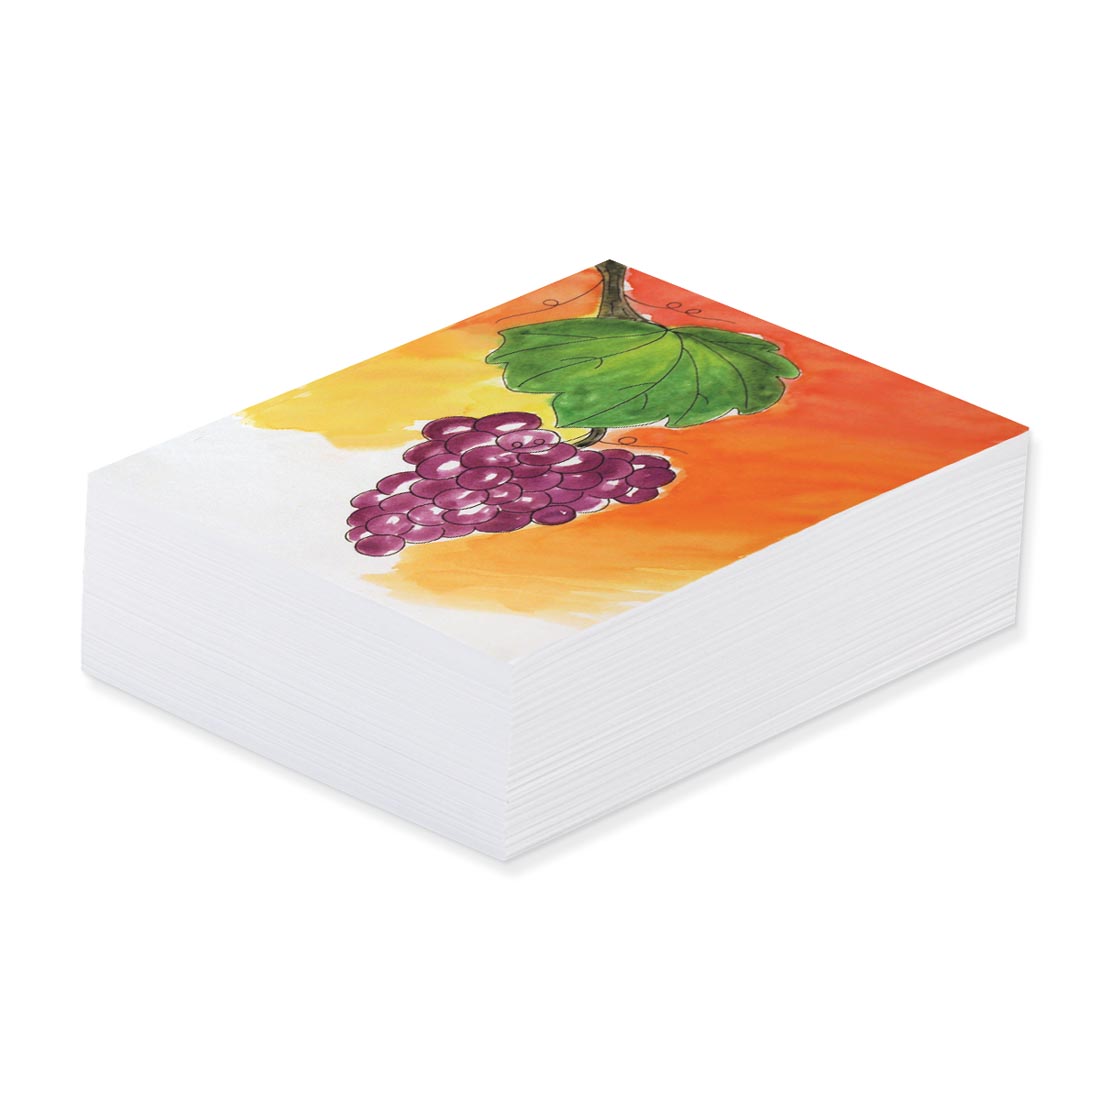 Stack of UCreate Mixed Media Art Paper with grapes painted on top